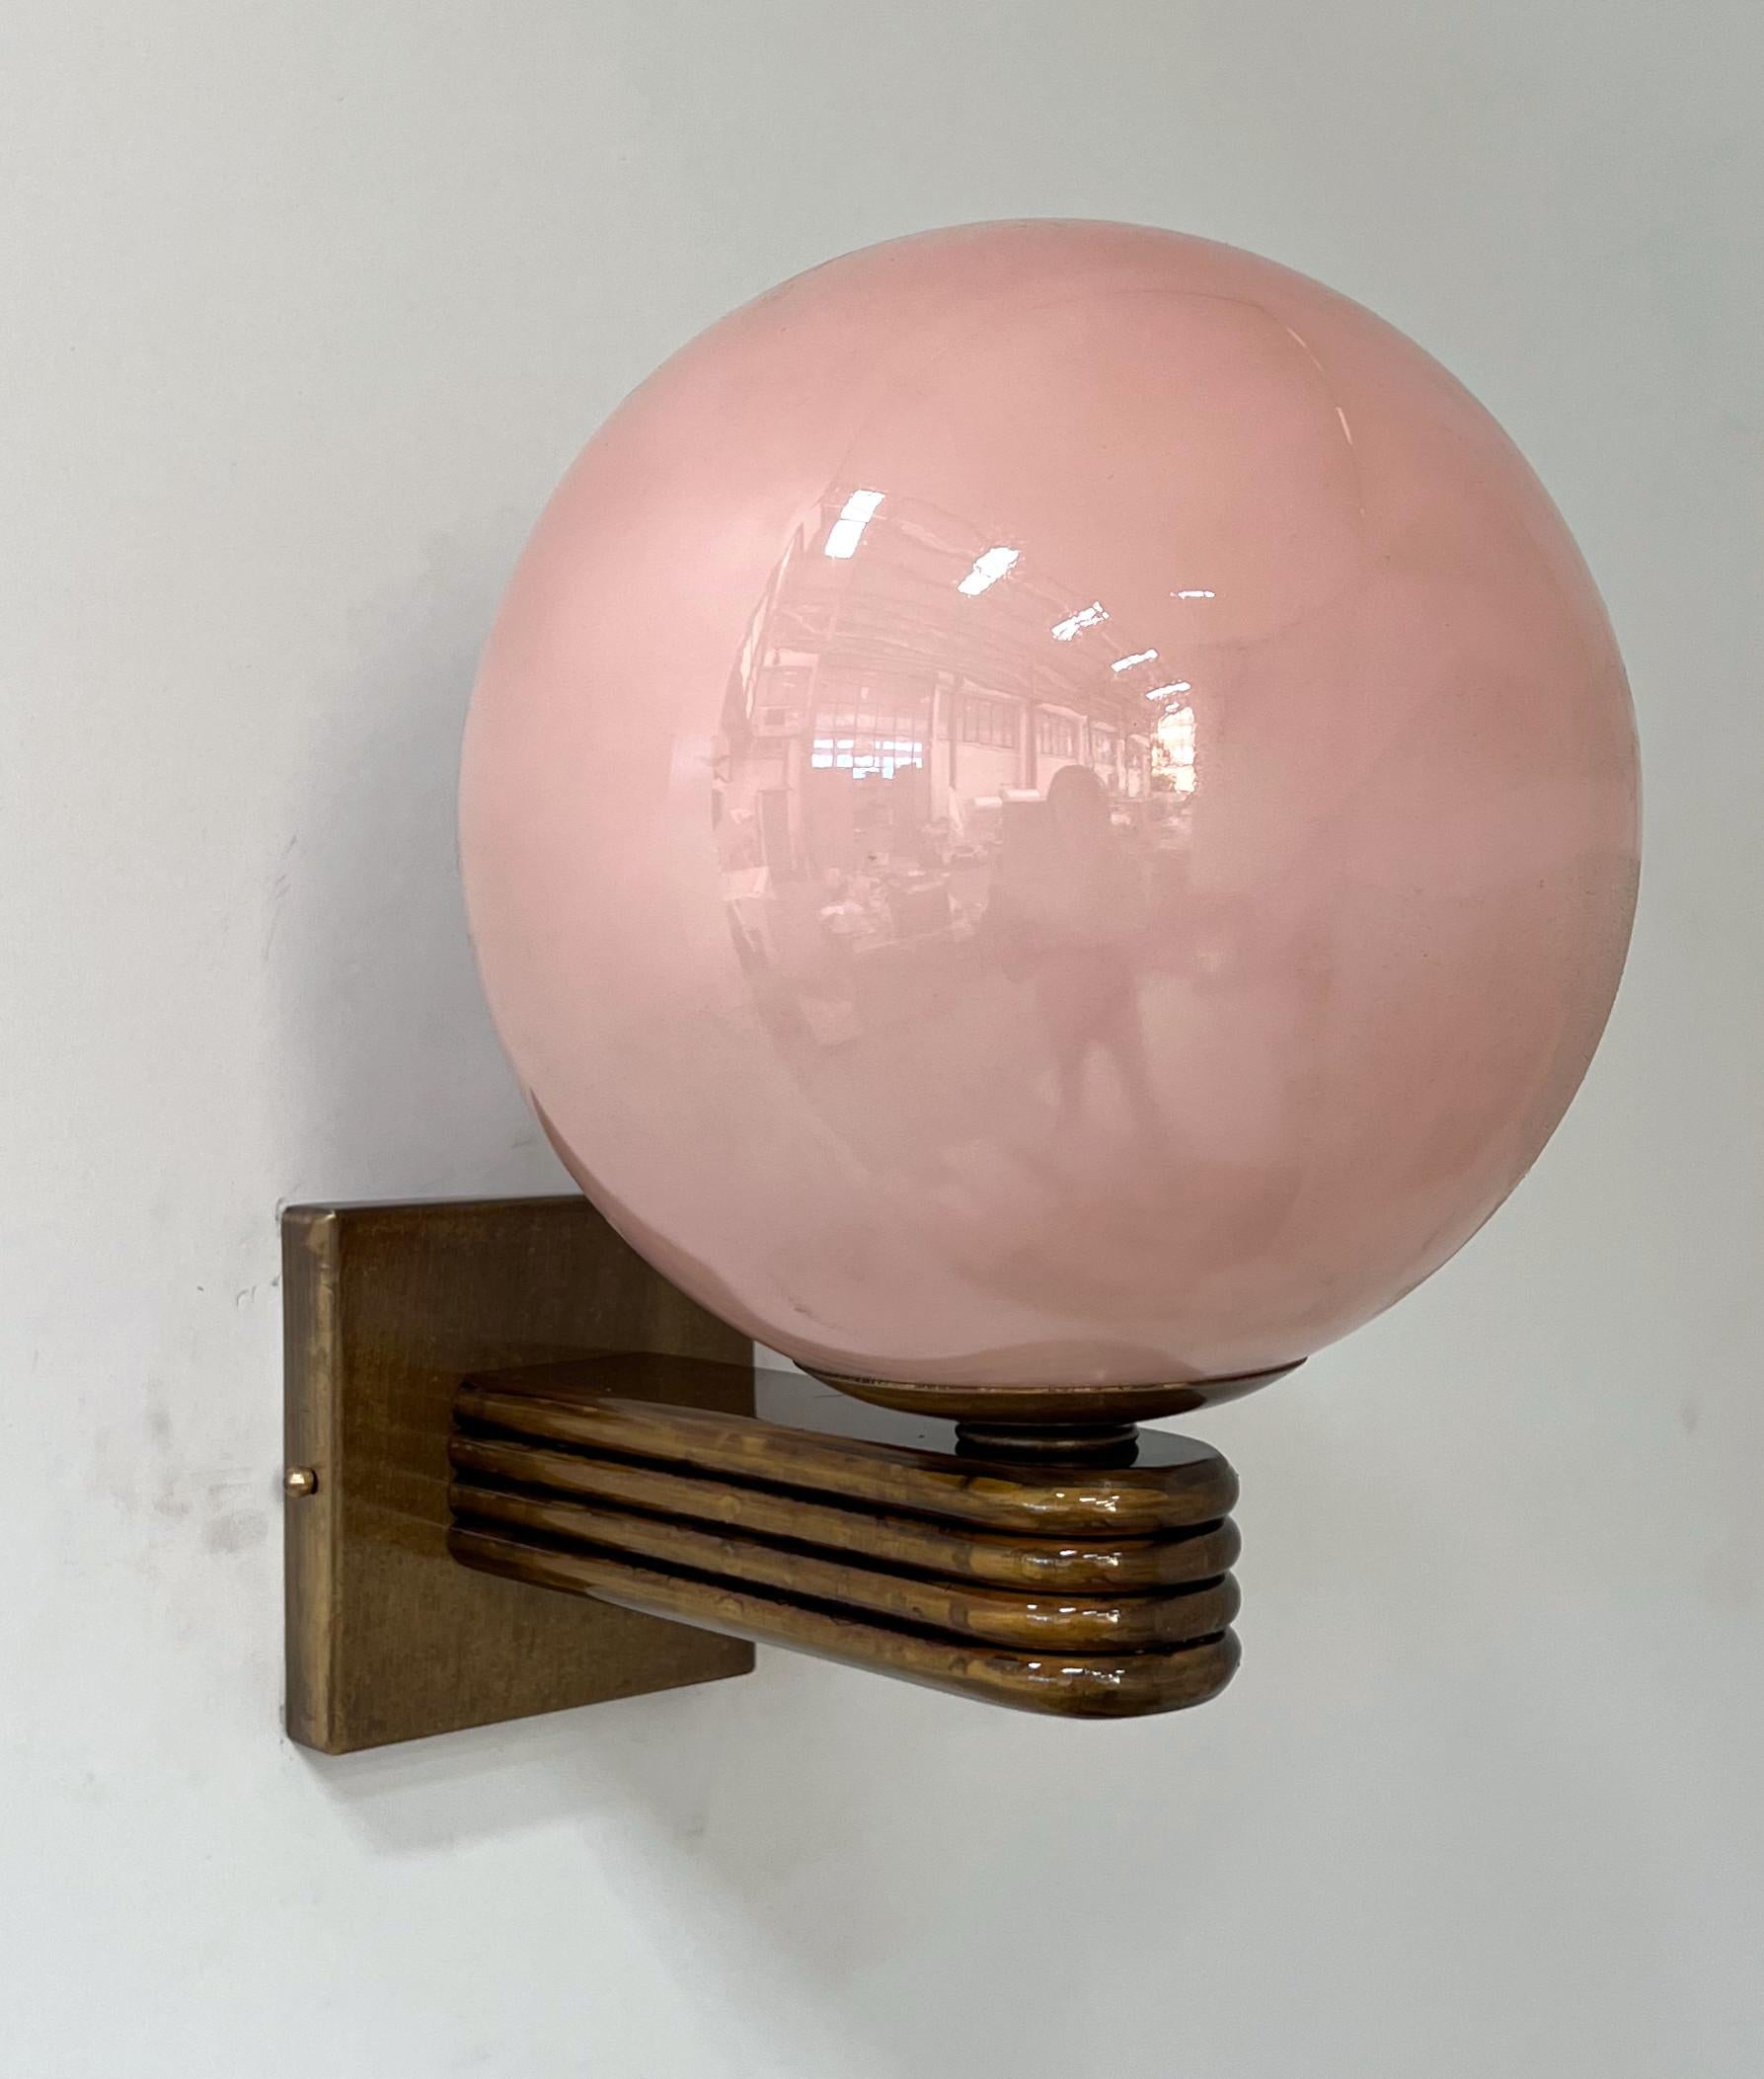 Italian Art Deco style wall light with opaque pink coral Murano glass globe mounted on bronzed finish frame, designed by Fabio Bergomi for Fabio Ltd, made in Italy
1 light / E12 or E14 type / max 40W
Measures: Height 12 inches, width 8 inches, depth